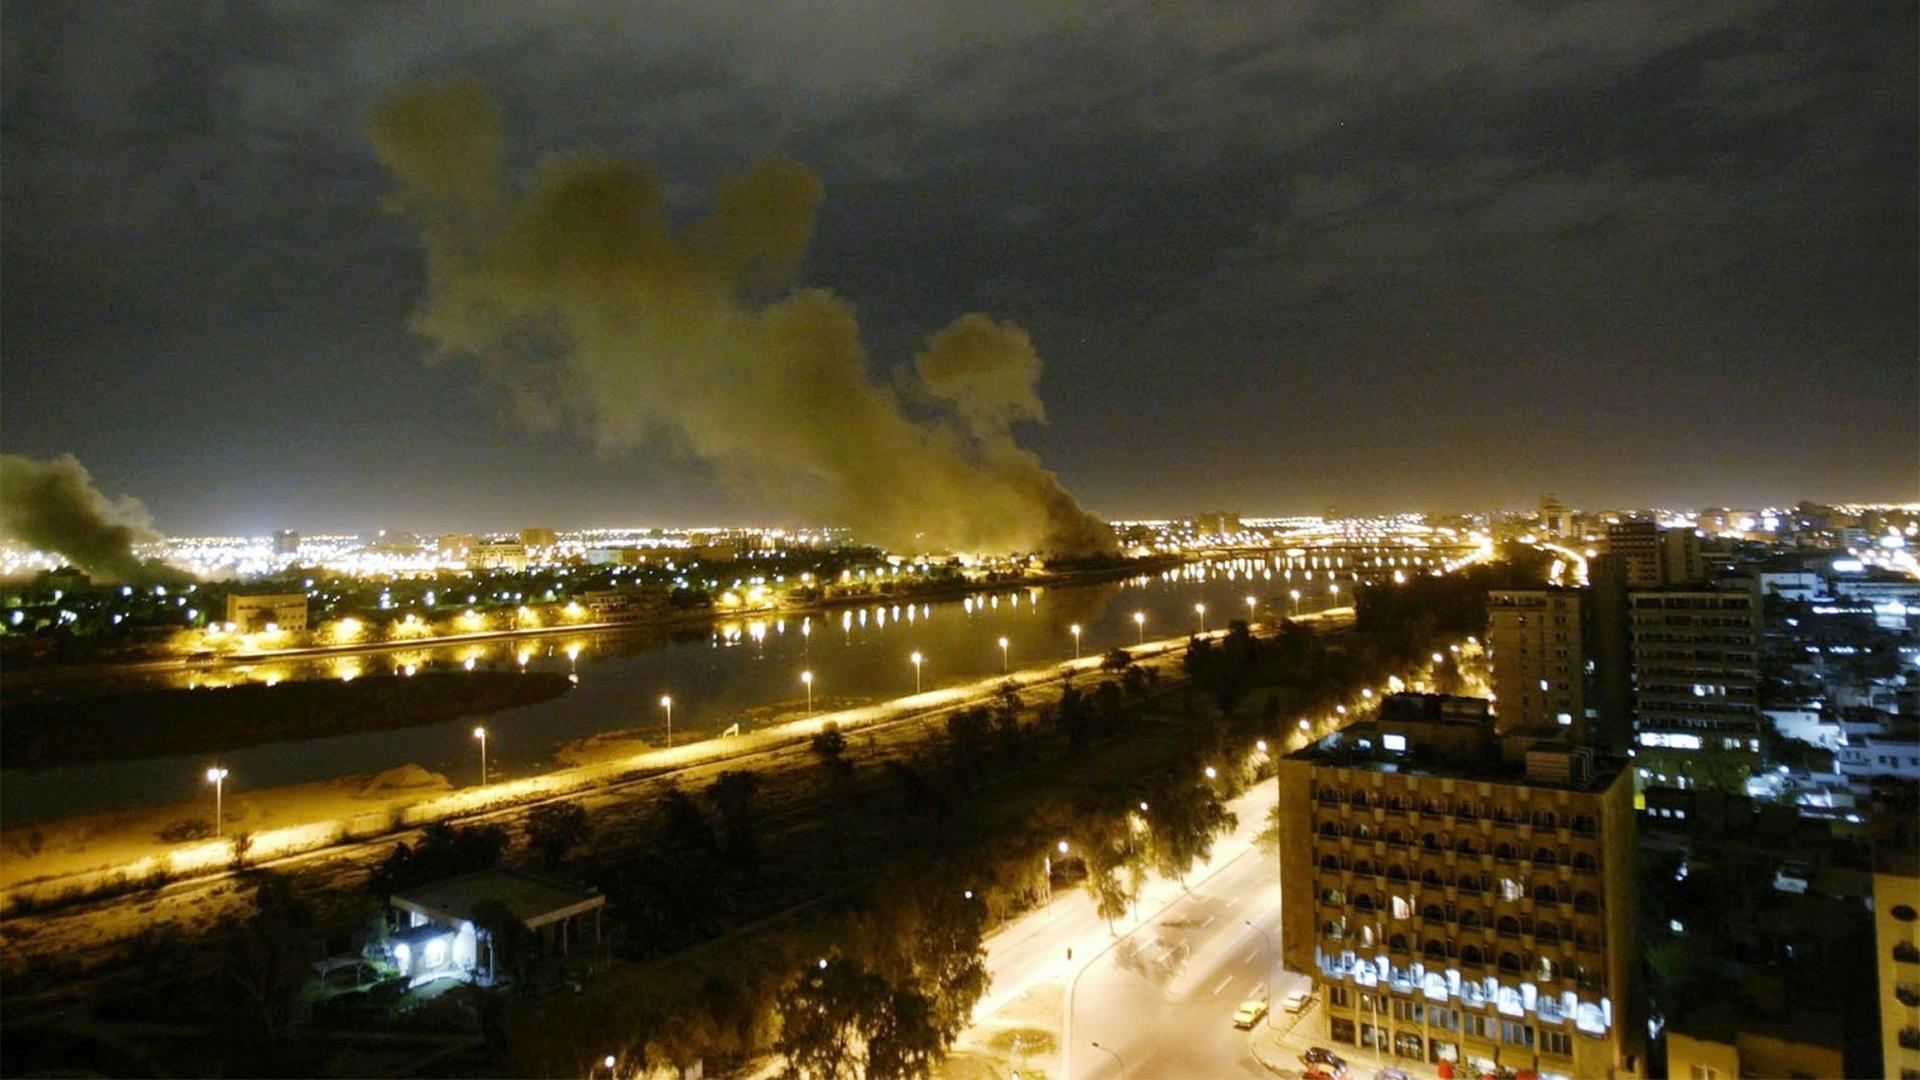 Smoke rises from the Trade Ministry in Baghdad after it was hit by a missile during US-led attacks, March 20, 2003.